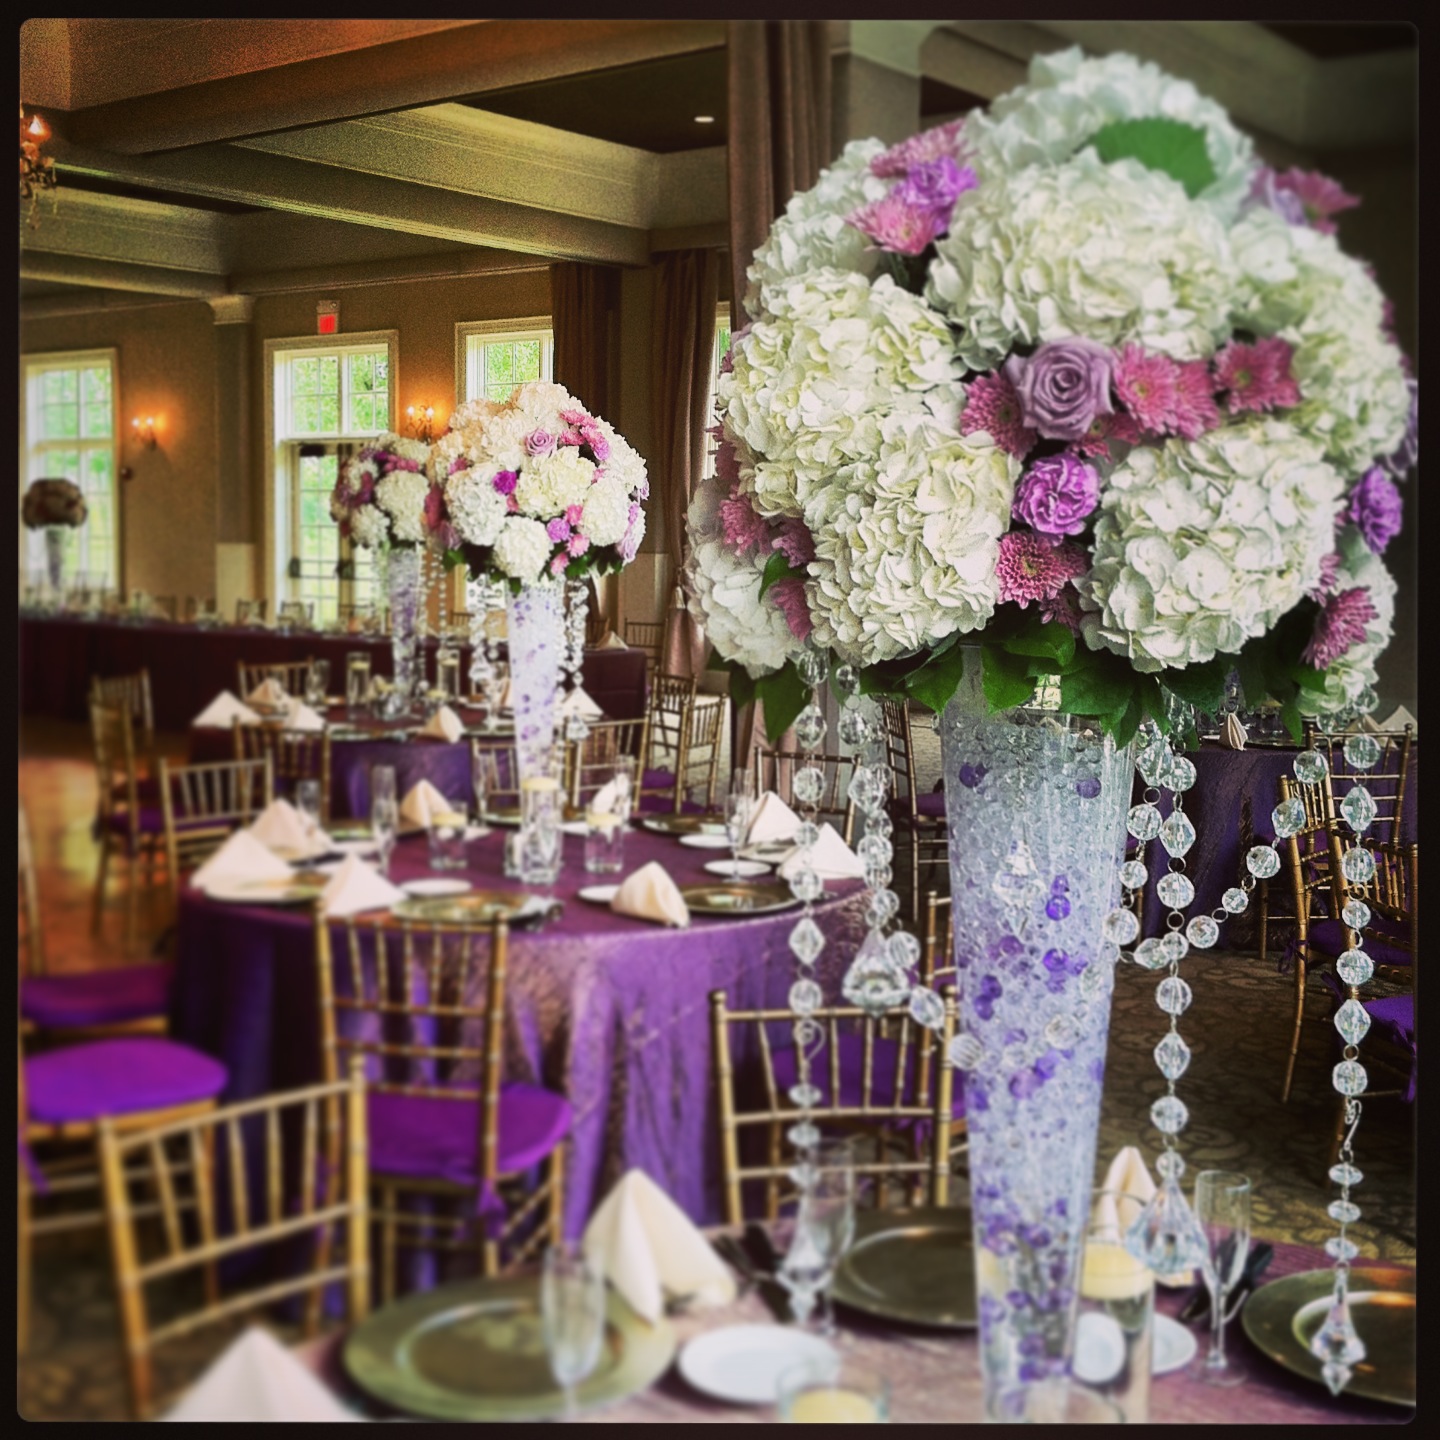 This Wedding Centerpiece was completed at the Pinnacle Golf Club and include crystals, Ocean Song Lavender Roses, Lavender Cushion Mums, White Hydrangea, Florigene carnations and accents of water gels